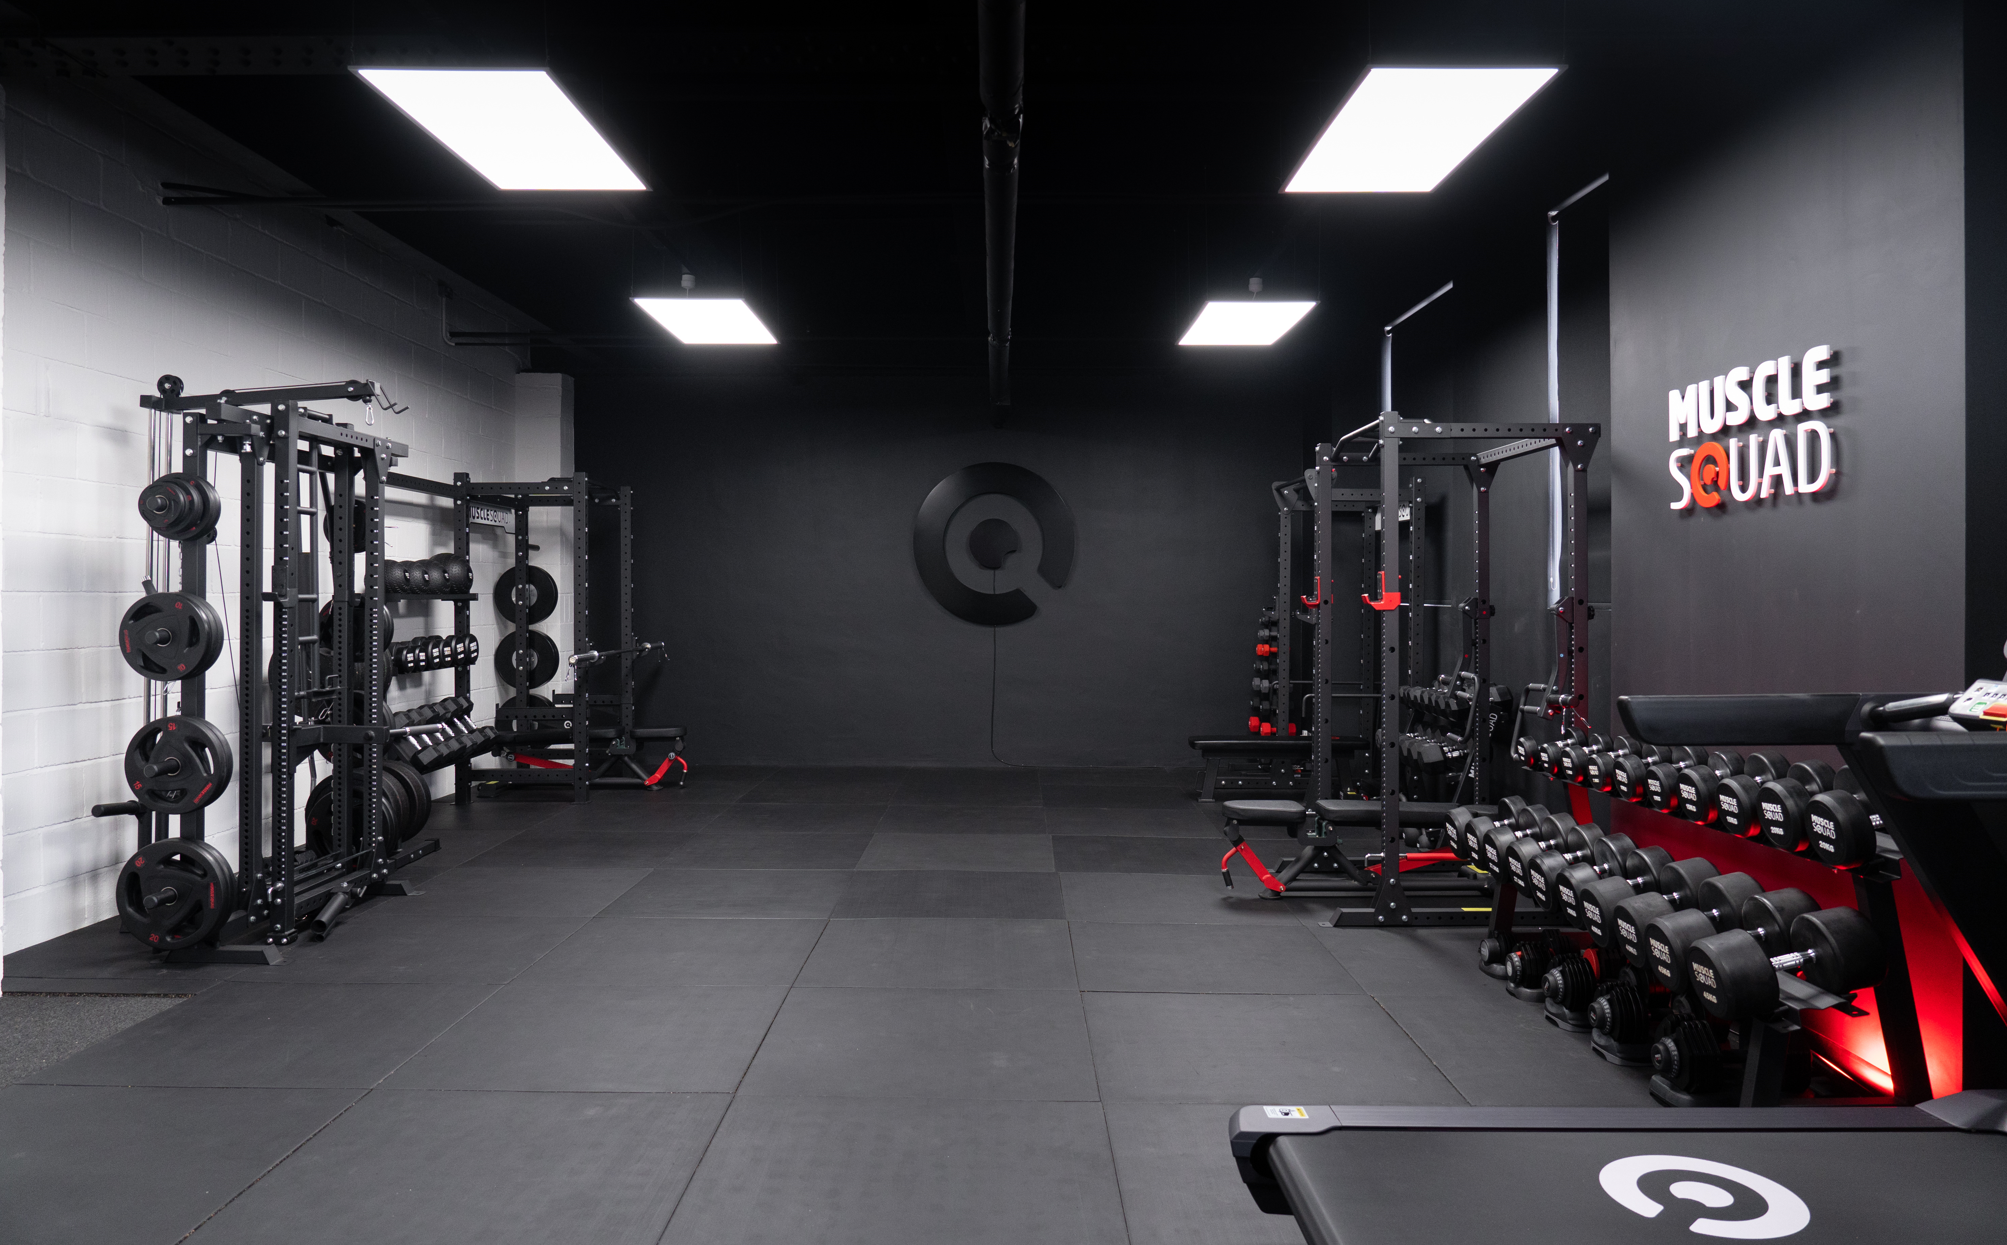 Rubber flooring for gym interiors